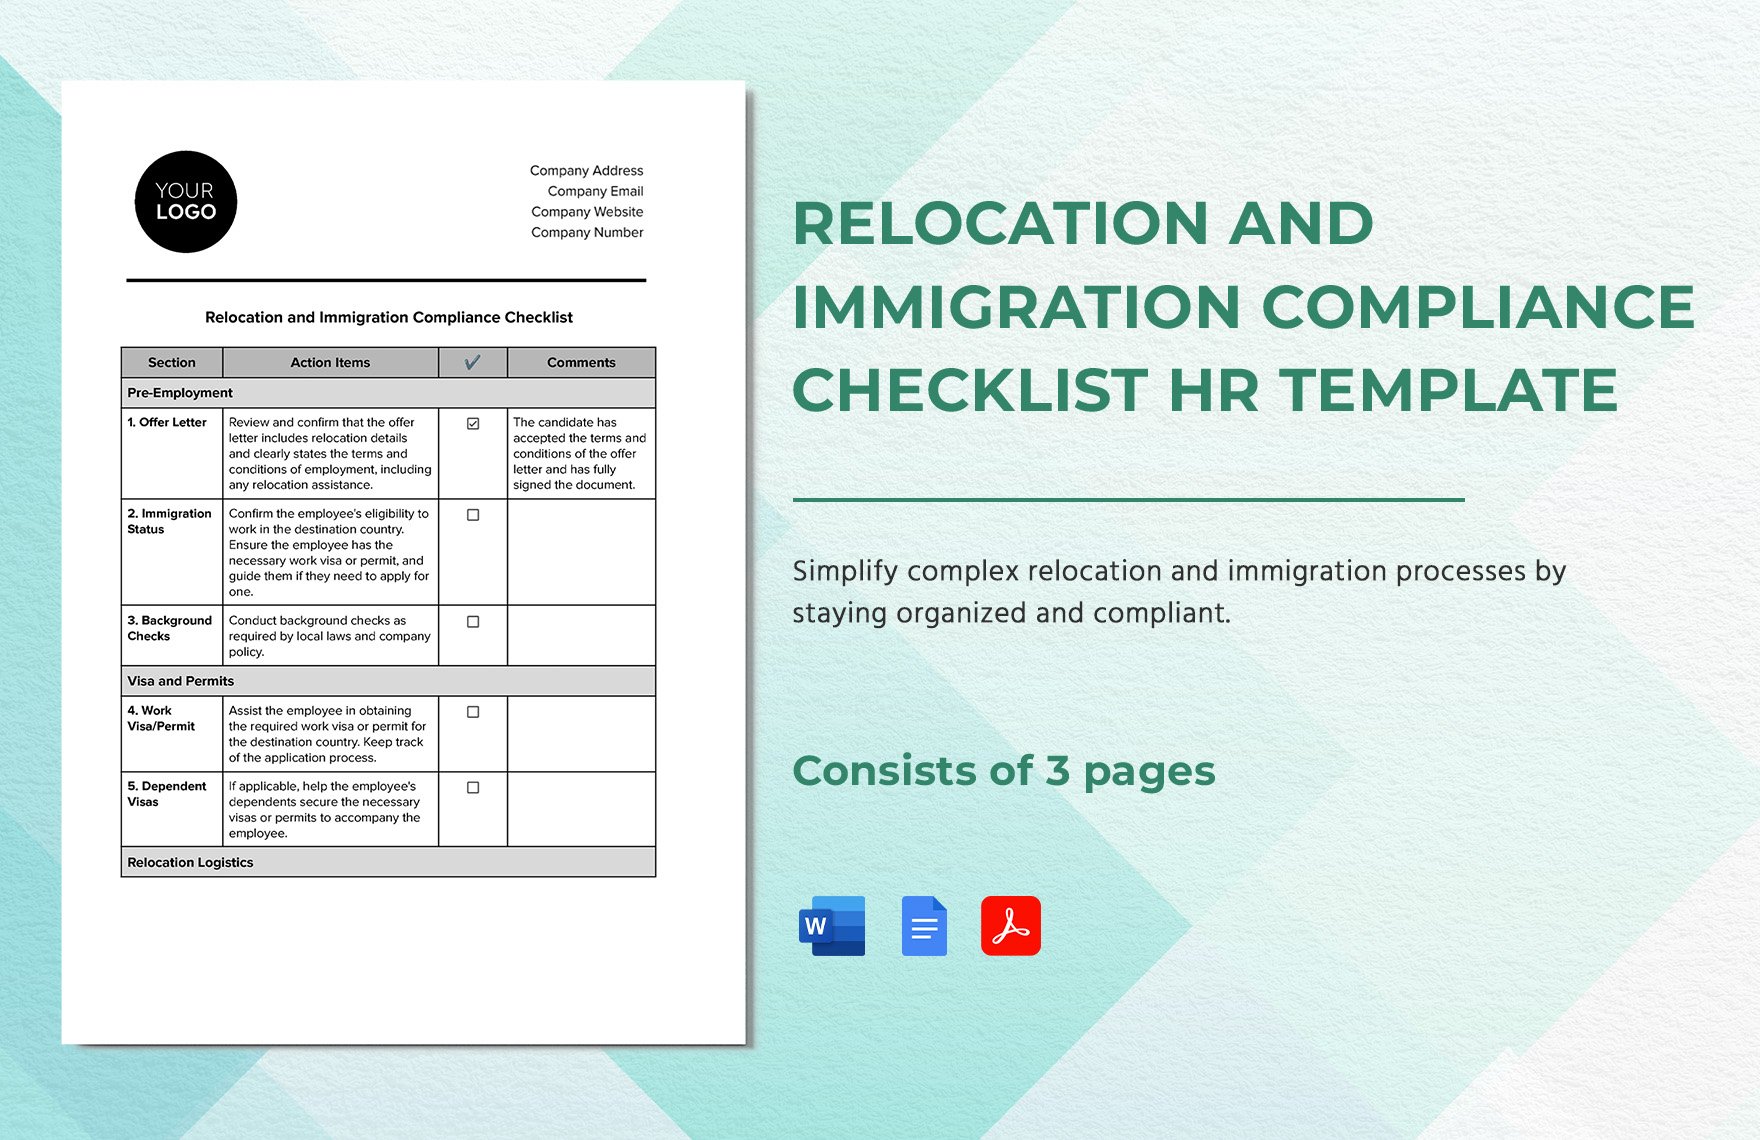 Relocation and Immigration Compliance Checklist HR Template